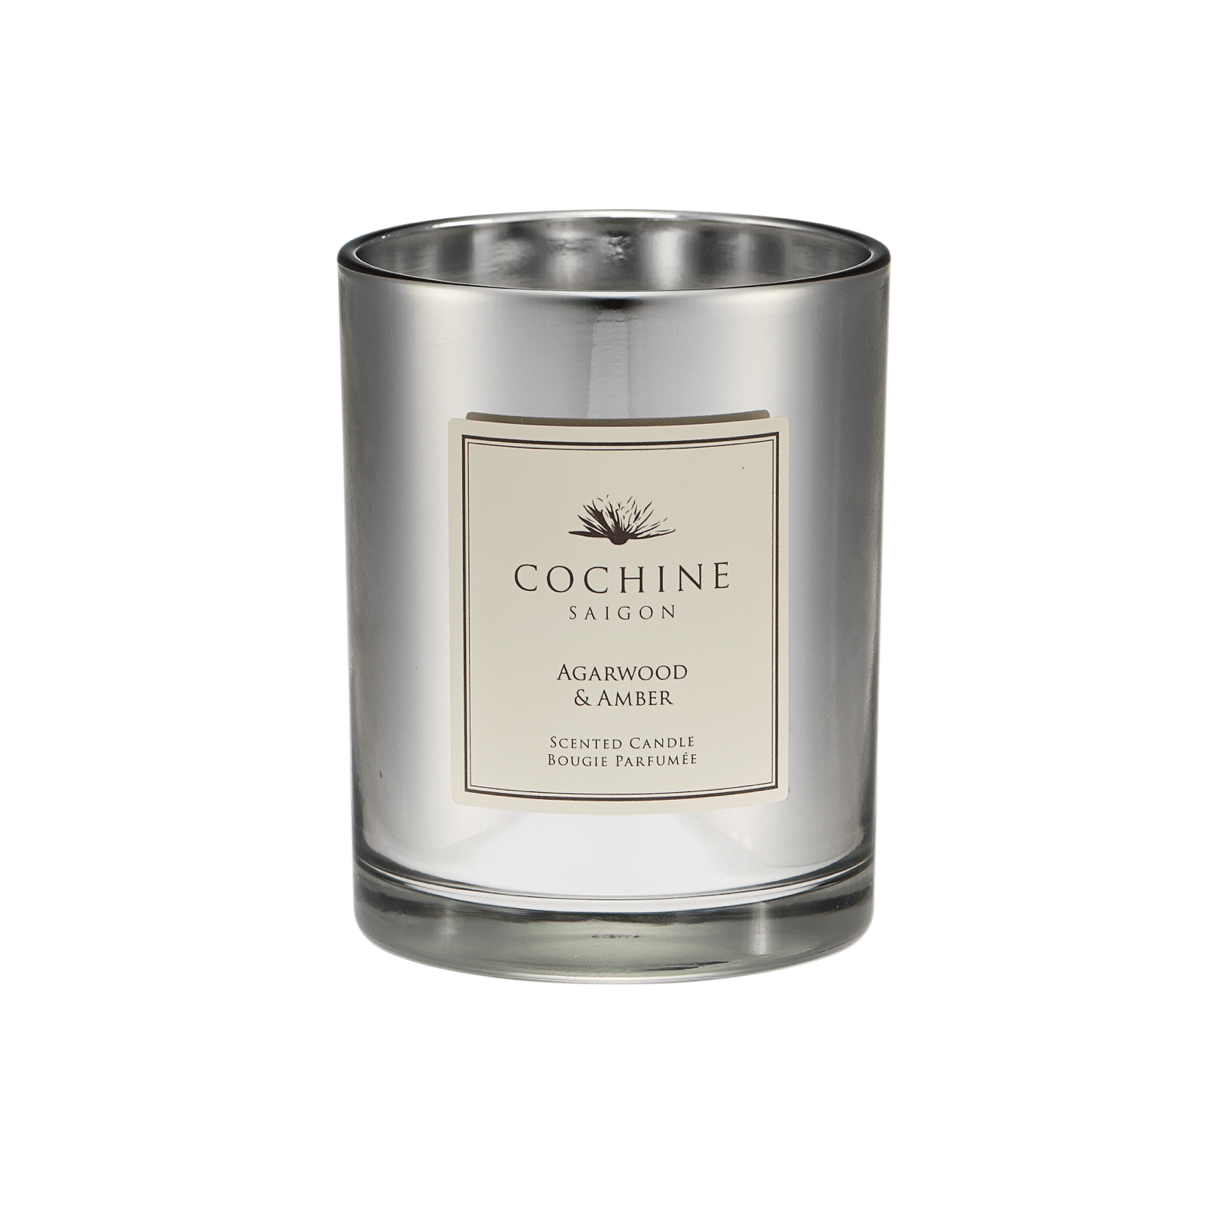 Cochine Home Fragrances of Cochines luxury scented candles and Cochine reed diffuers in Cochine Agarwood & Amber Candle